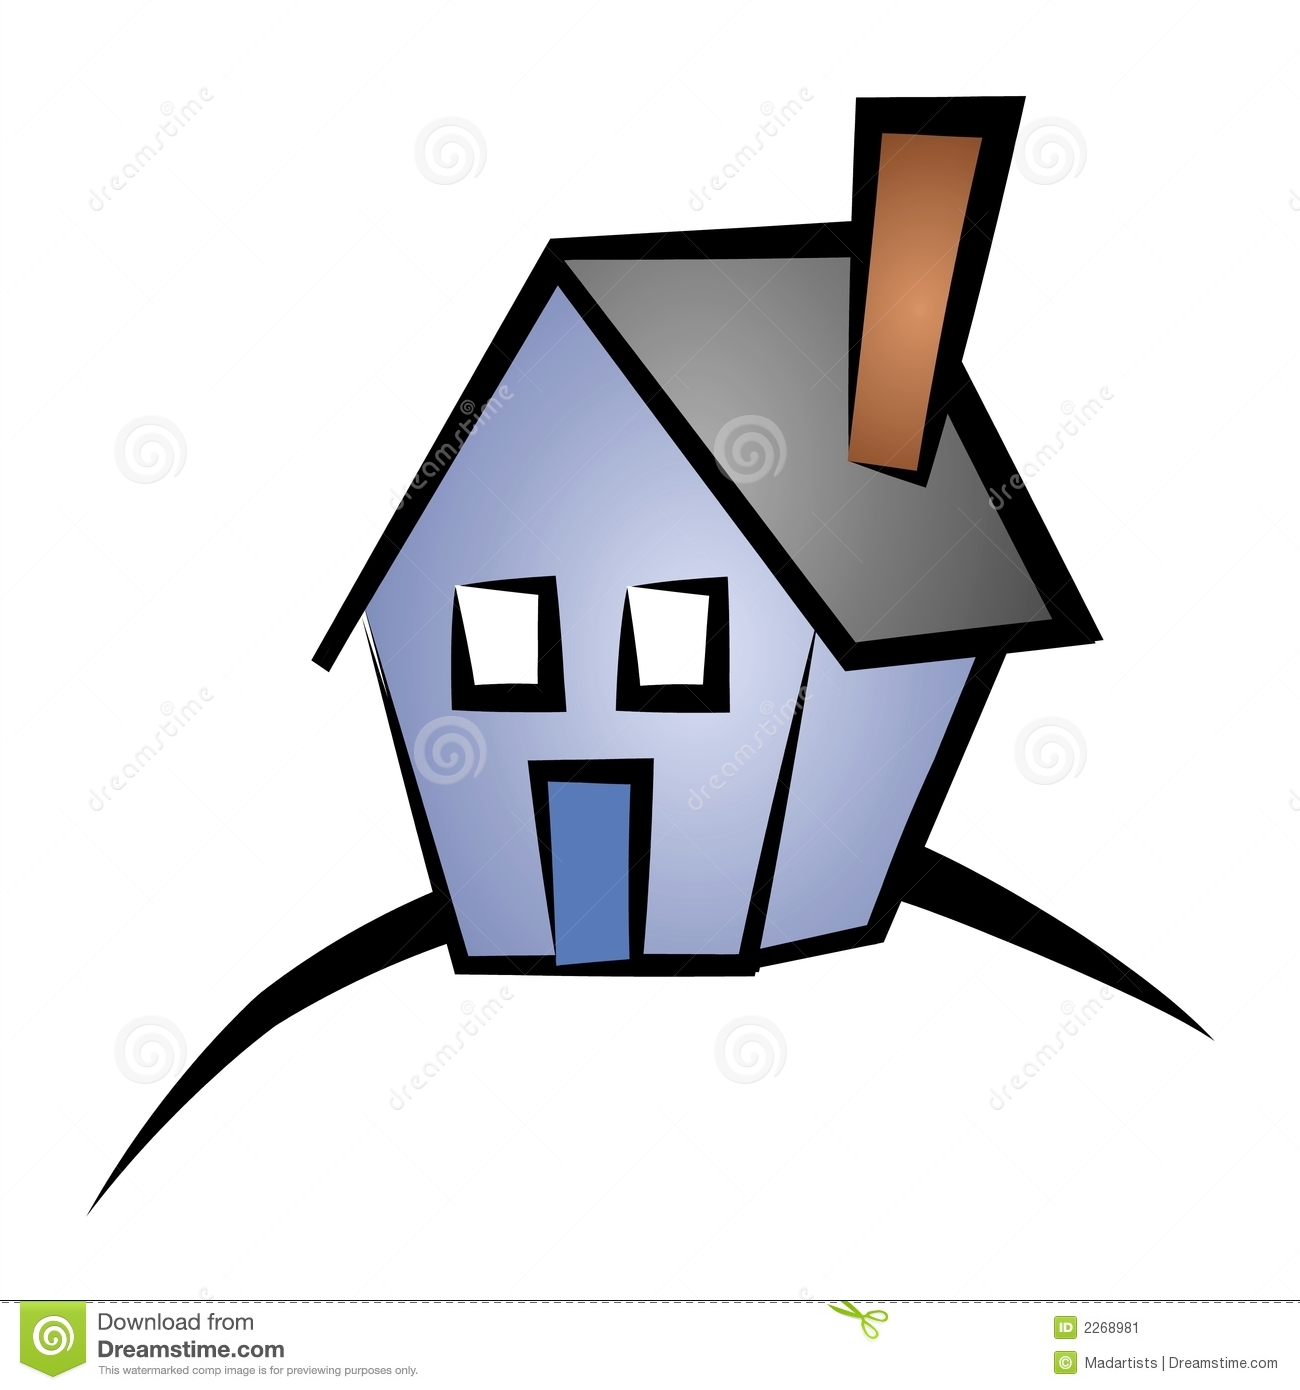 Real Estate Houses Clipart Free.